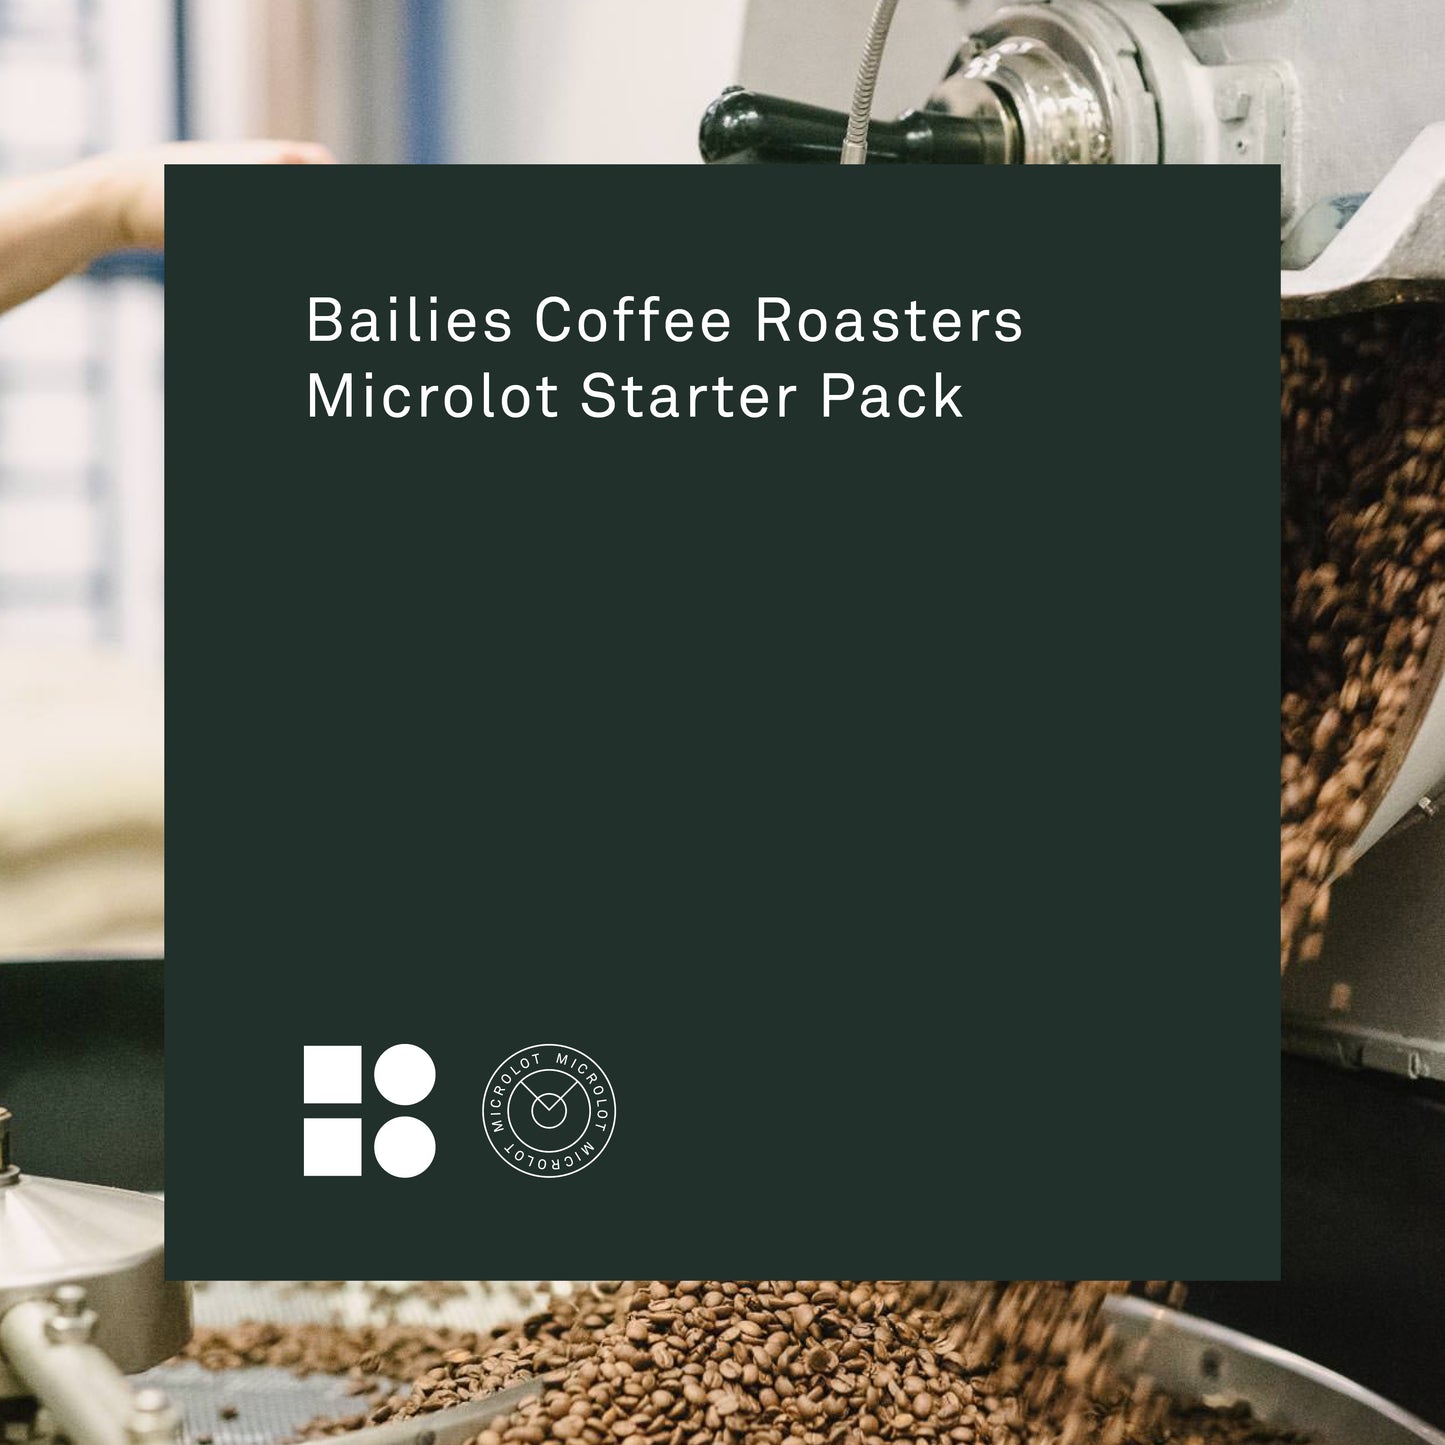 Microlot Starter Pack - Free UK Delivery - Bailies Coffee Roasters